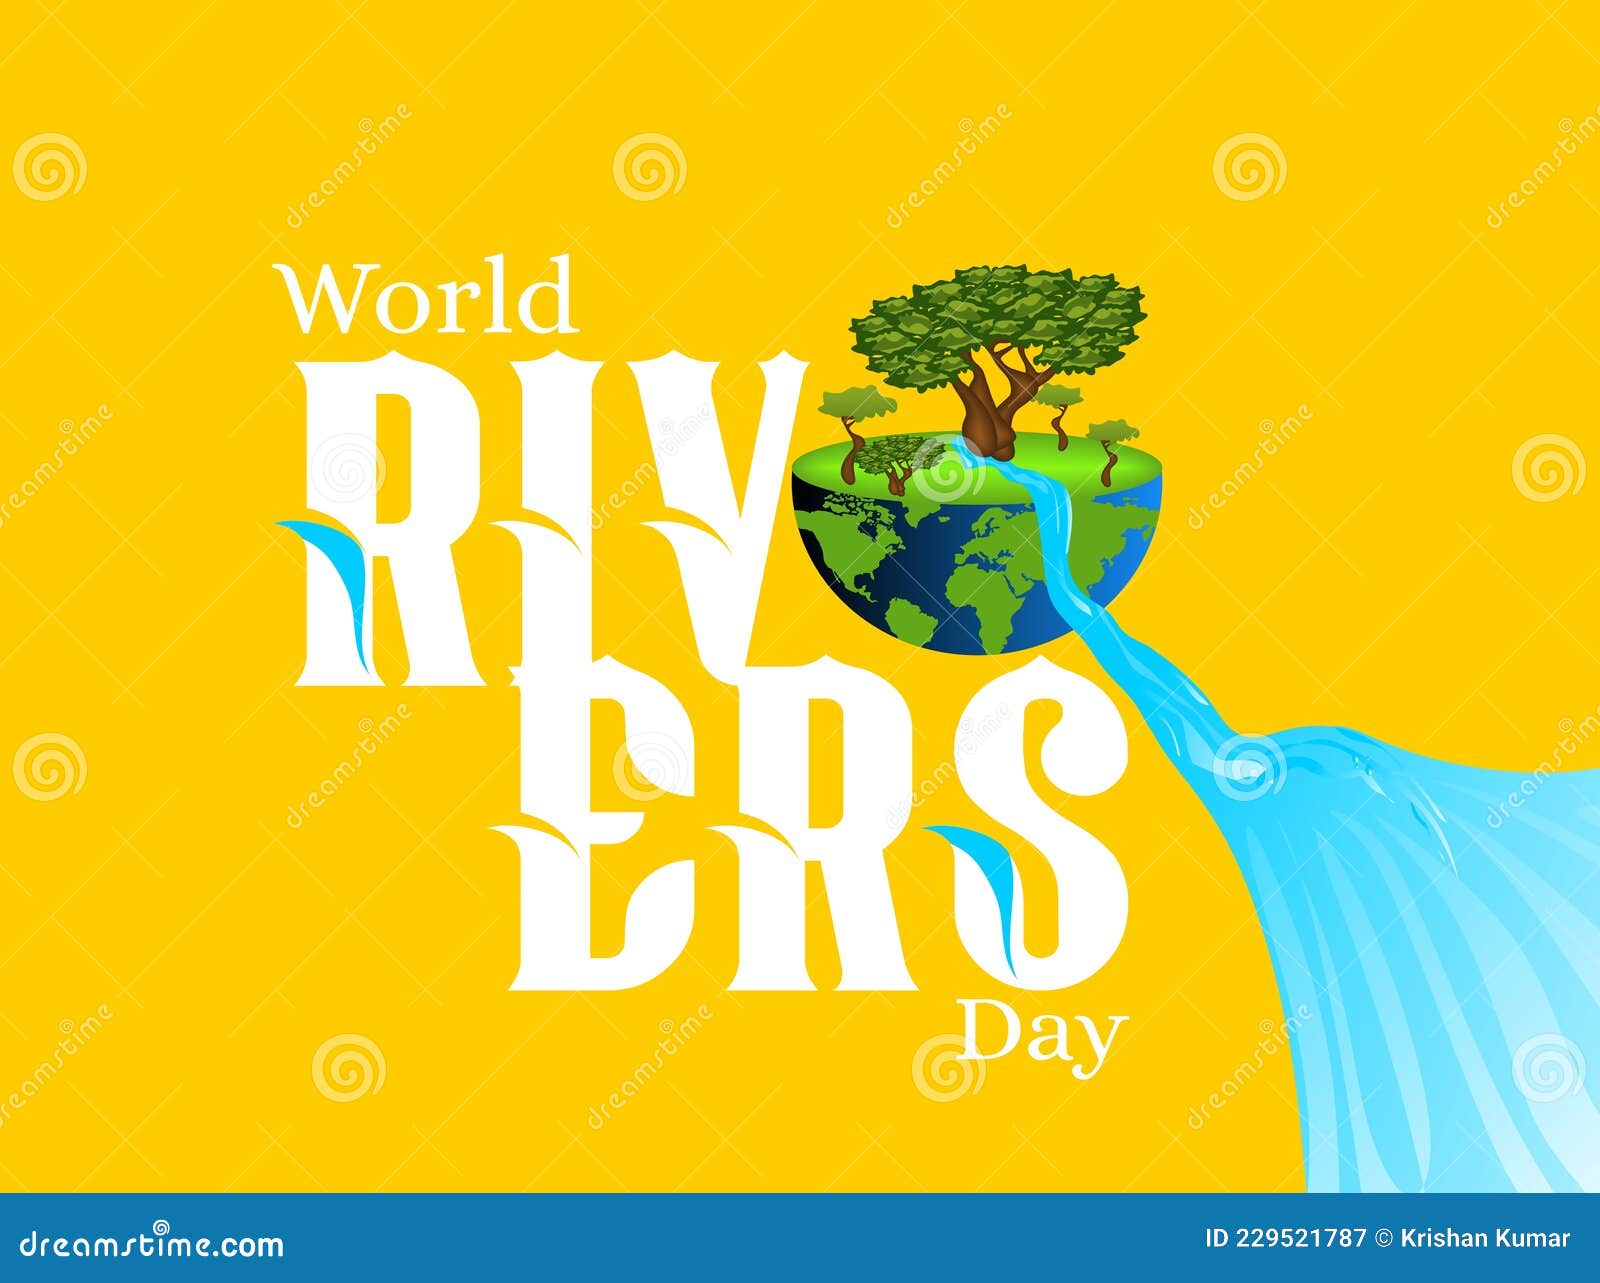 World Rivers Day. River Day Banner and Poster Design for Social Media